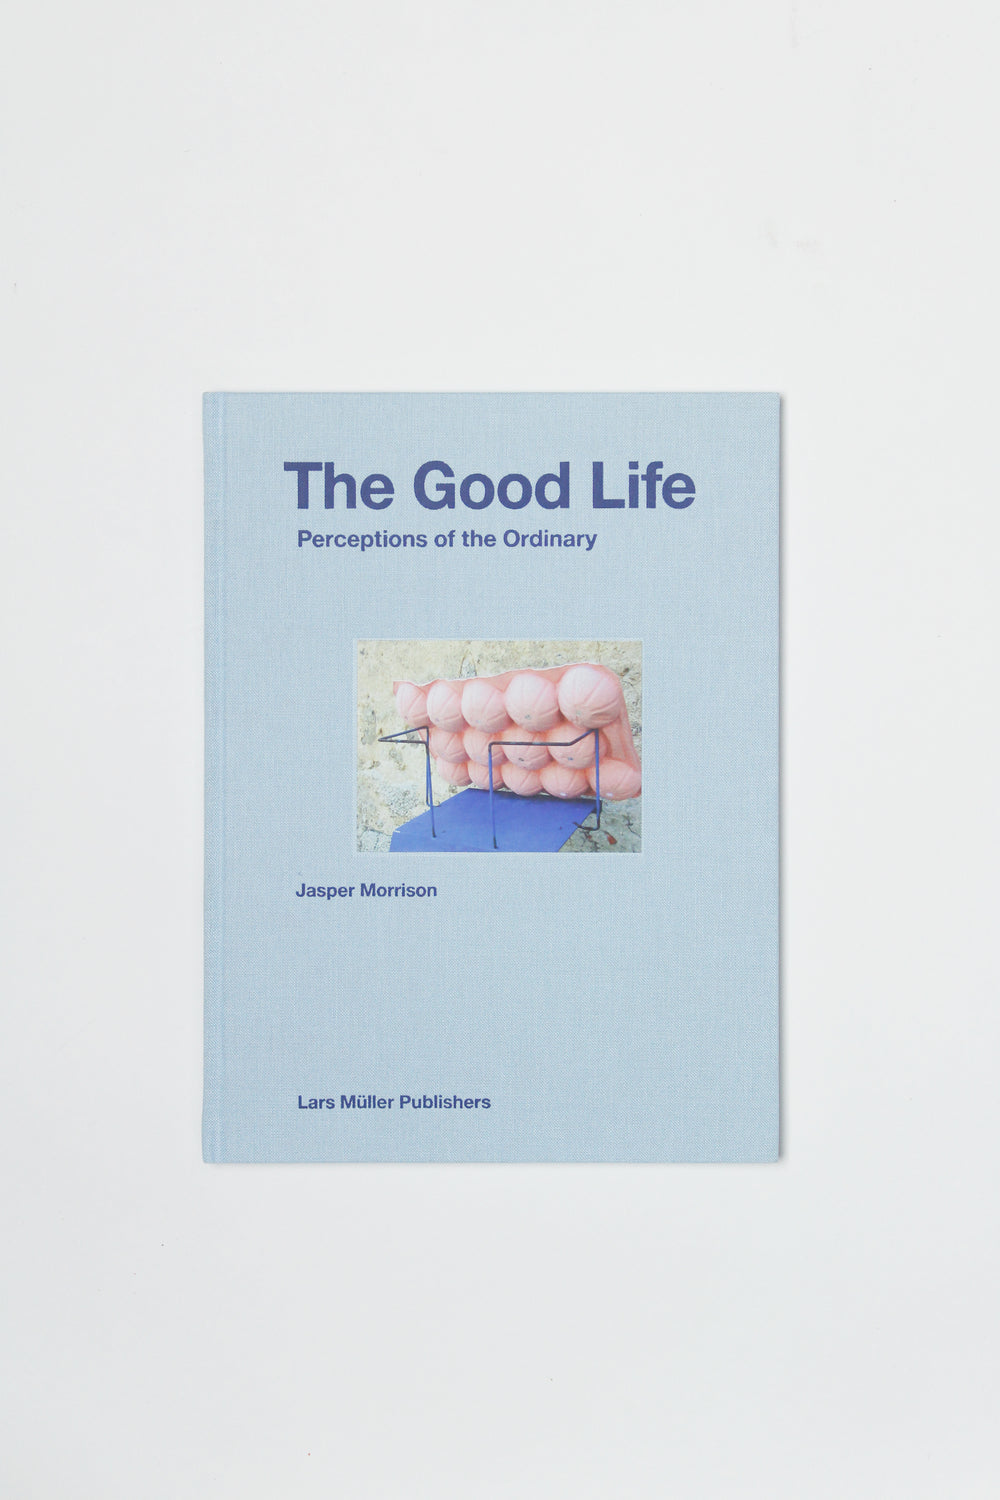 The Good Life, Perceptions of the Ordinary